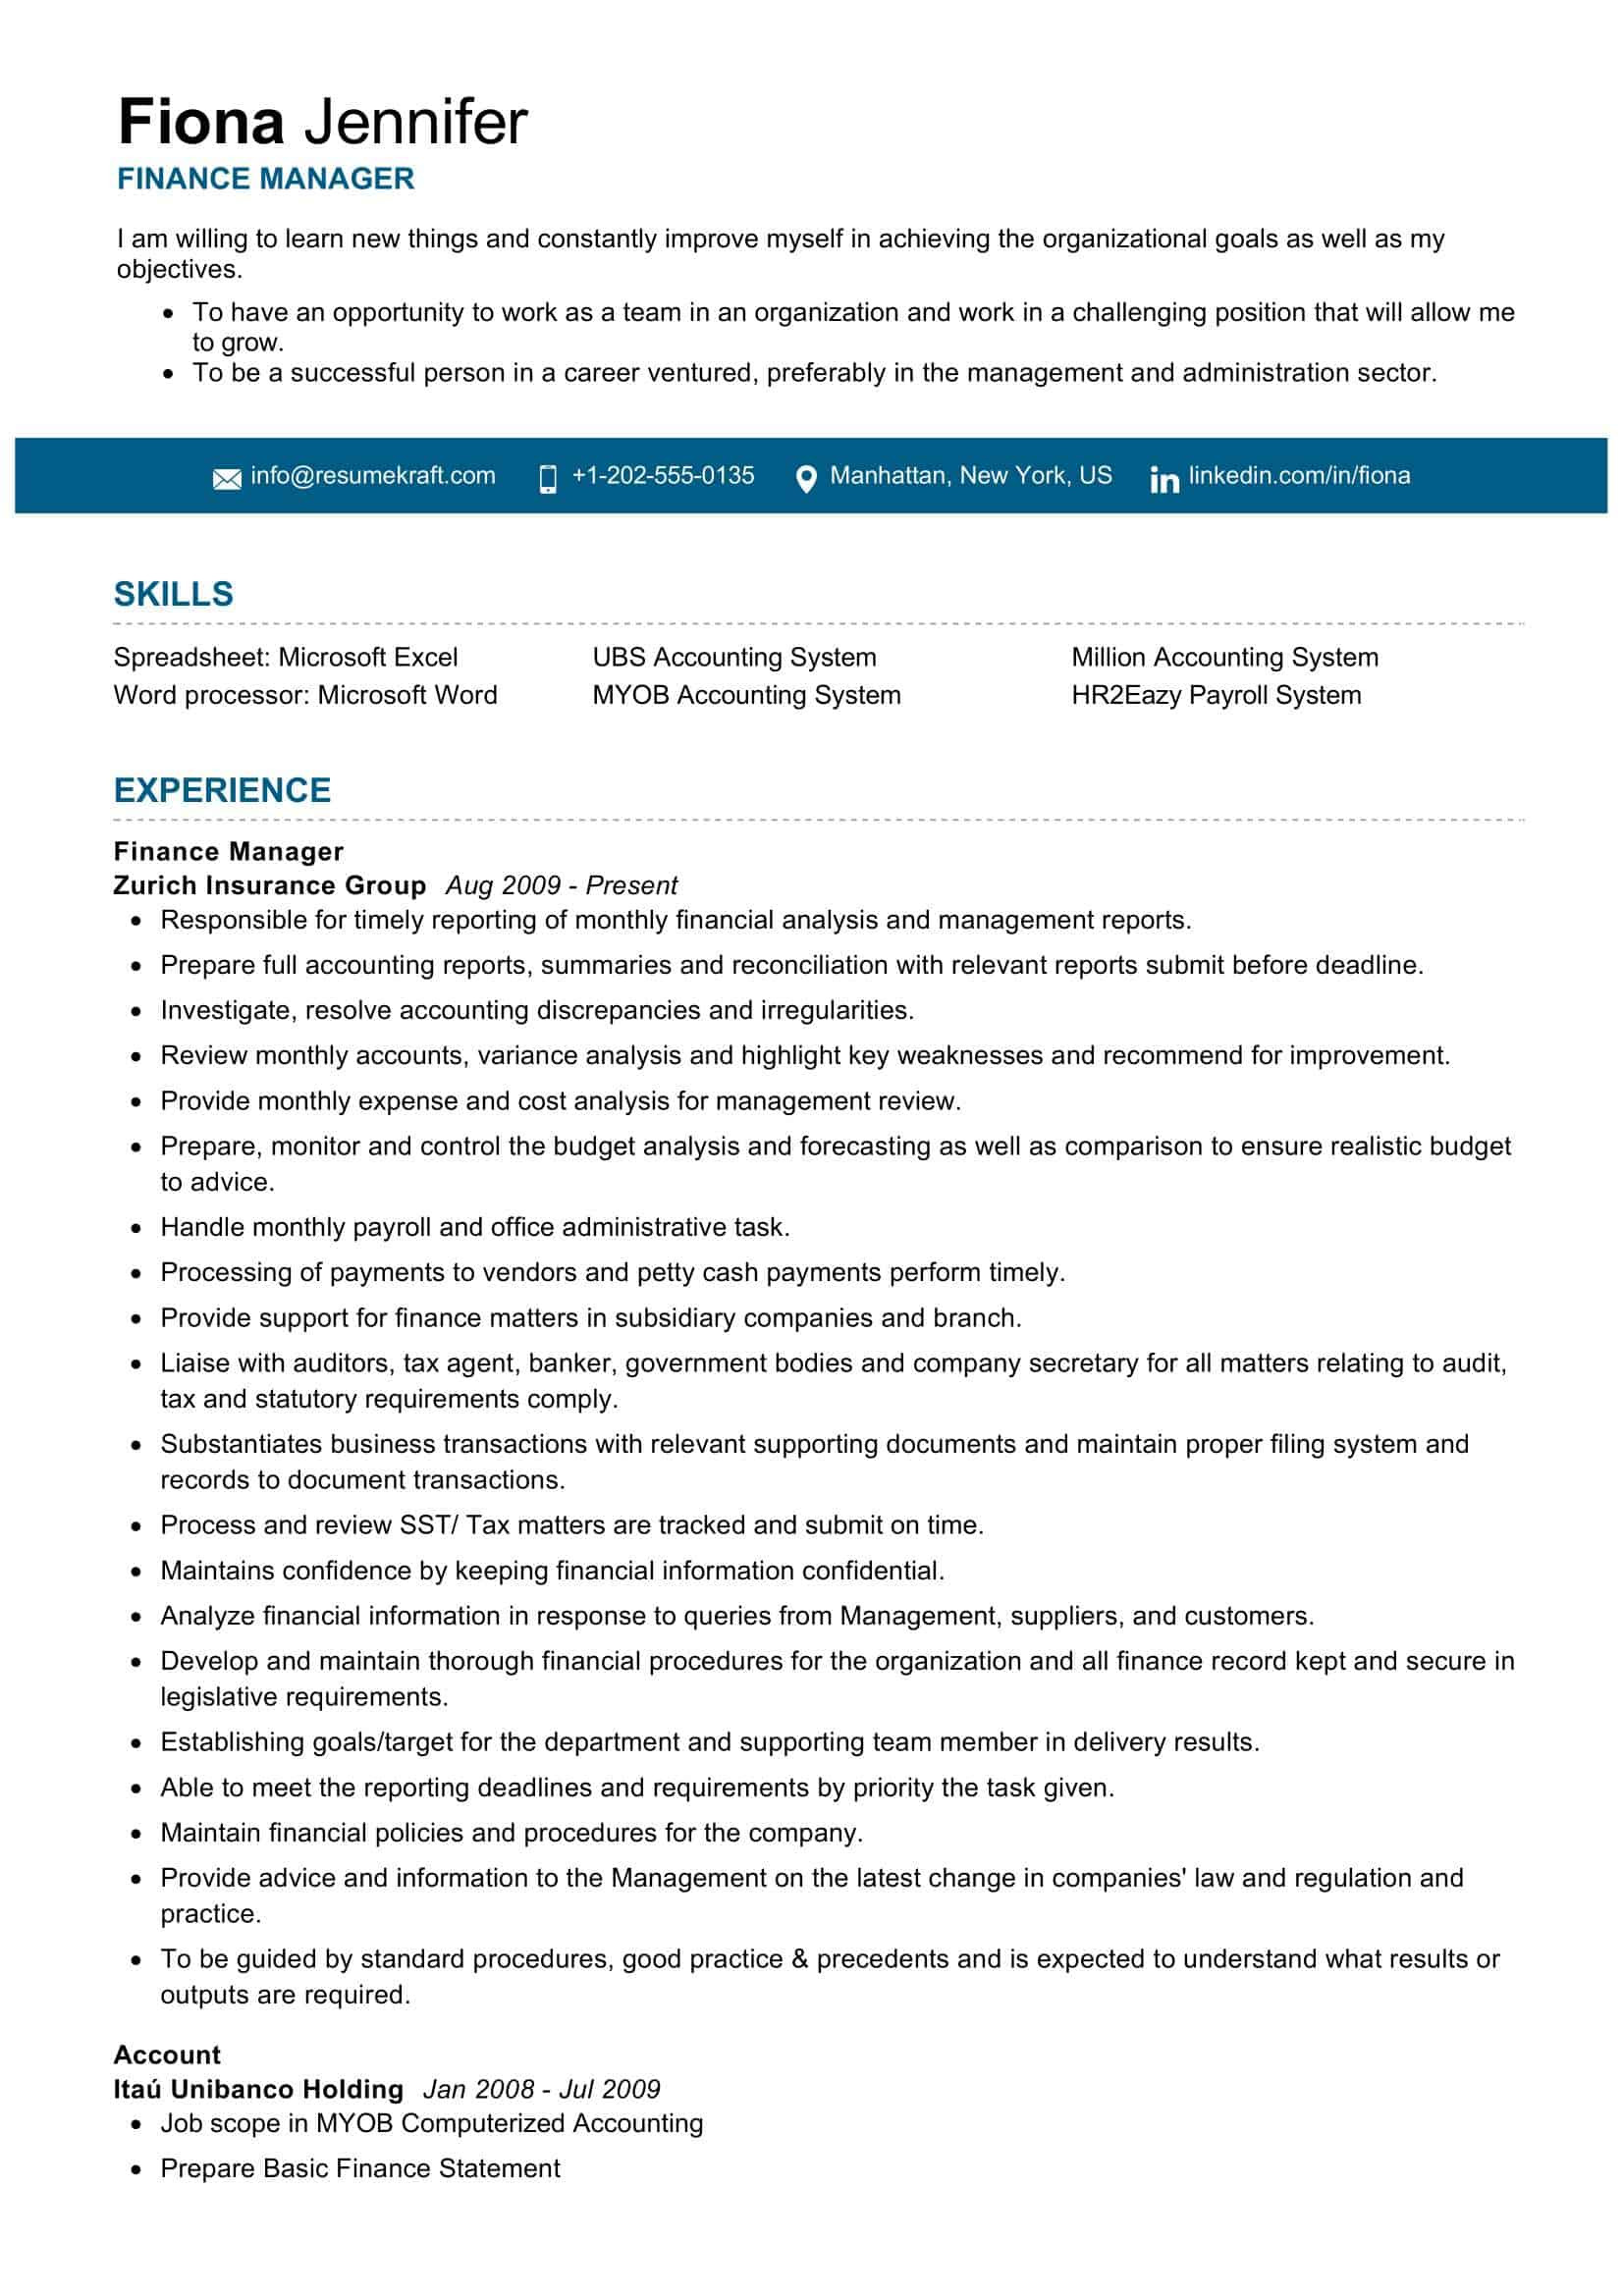 Resume Samples for Experienced Finance Professionals Finance Manager Resume Sample 2021 Writing Tips – Resumekraft